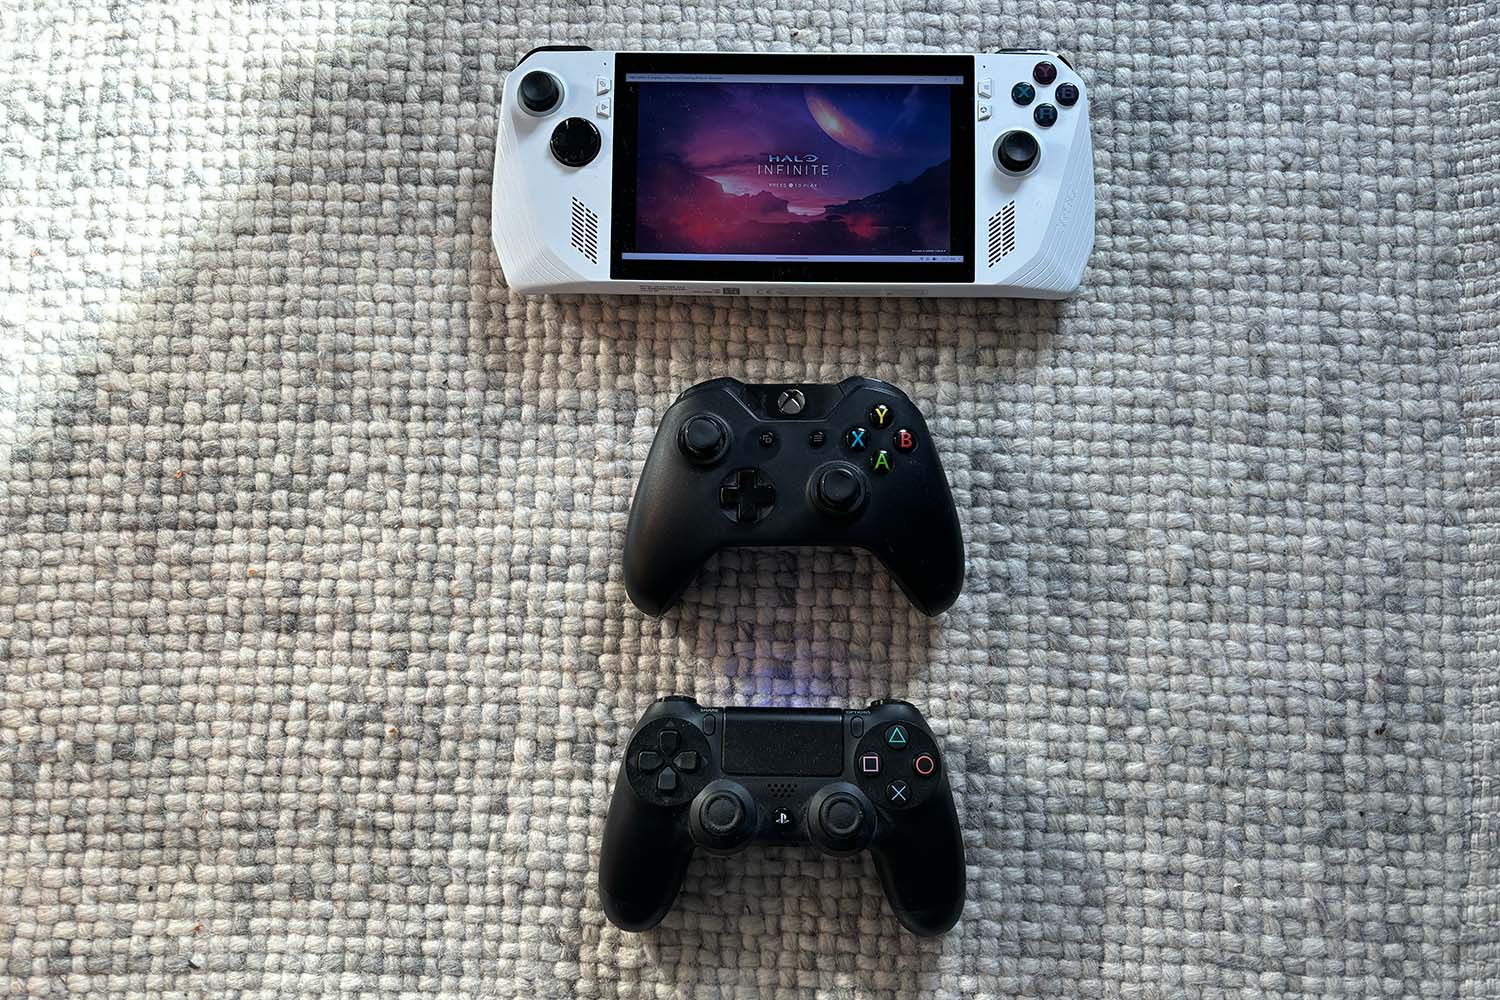 A comparison of the ROG Ally to an Xbox and PS4 controller